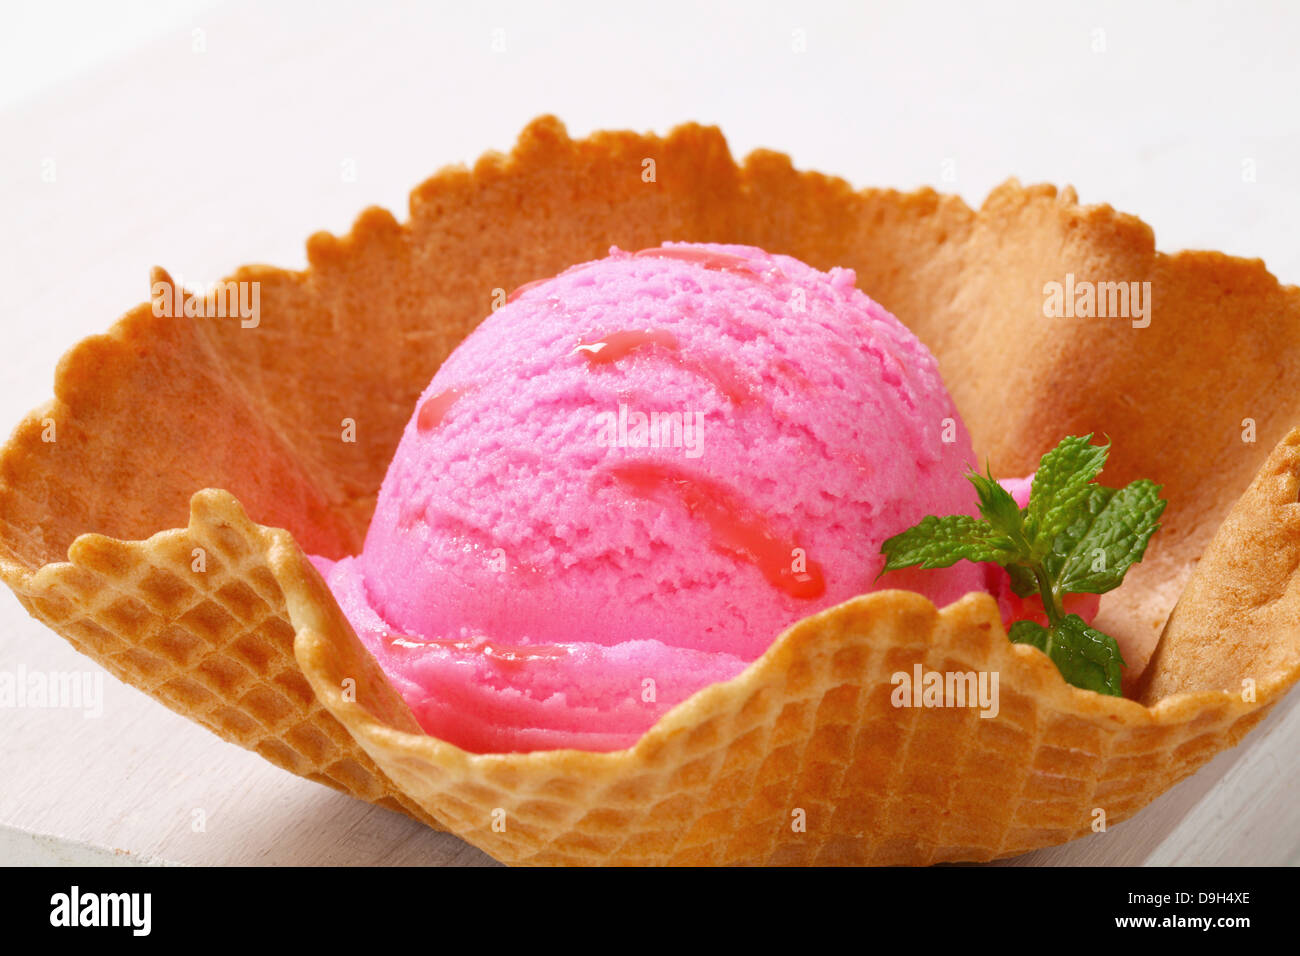 Fruit ice cream in a wafer bowl Stock Photo